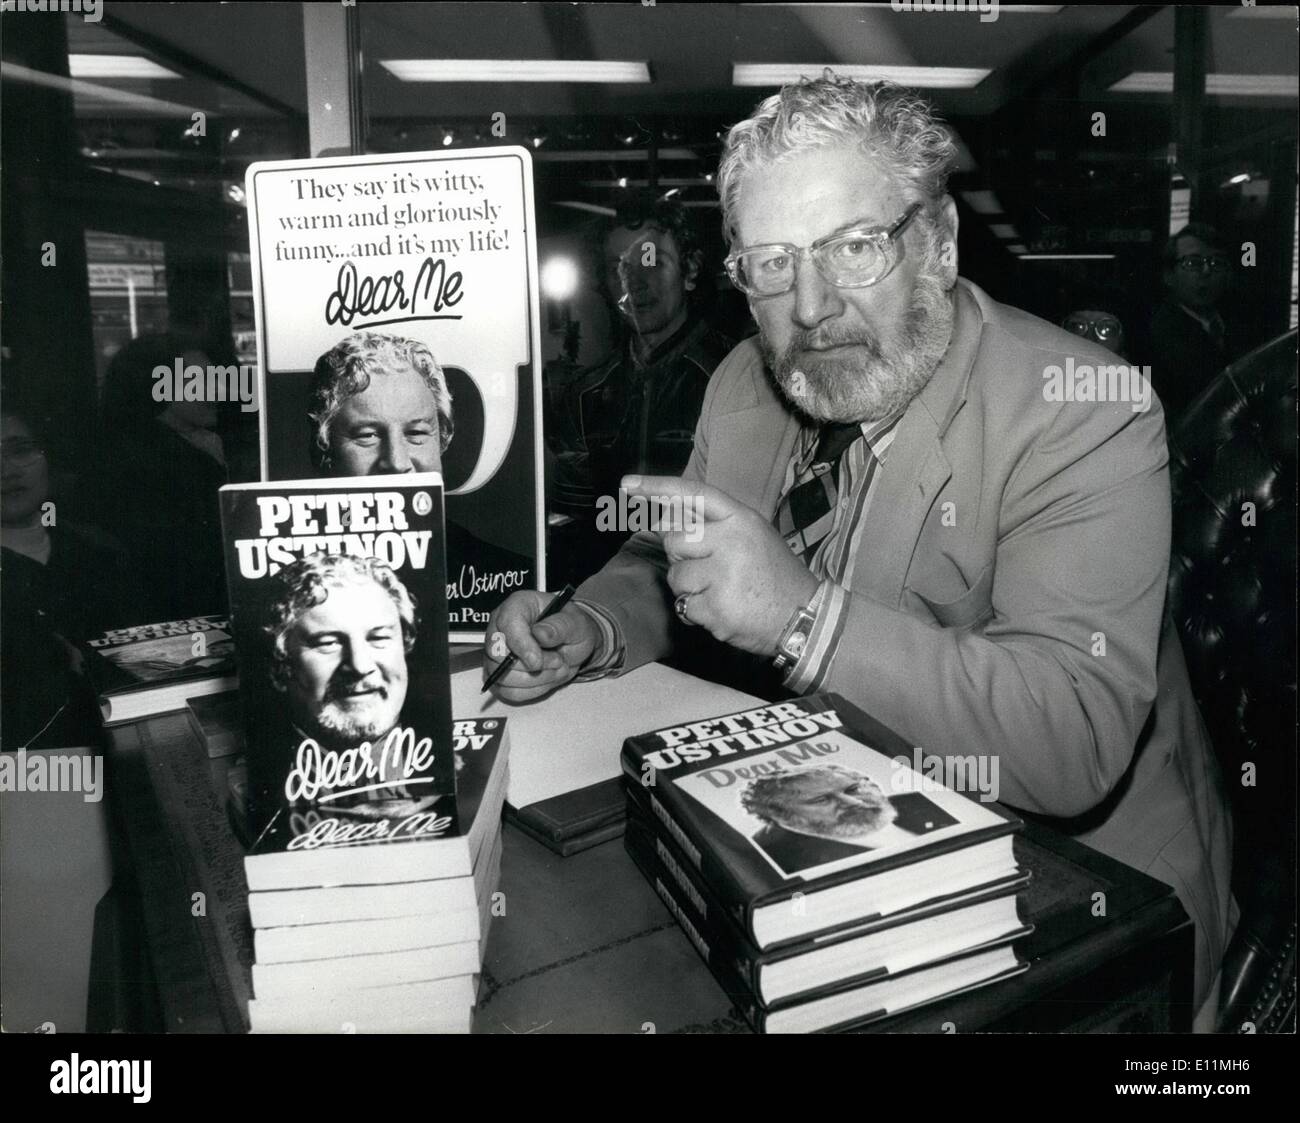 Feb. 09, 1979 - February 9th 1979 Peter Ustinov at Barkers. Actor Peter Ustinov was at Barkers in Kensington High Street today signing copies of his autobiography named Ã¢â‚¬ËœDear Me'. Photo Shows: Ustinov seen signing his book in Barkers today. Stock Photo